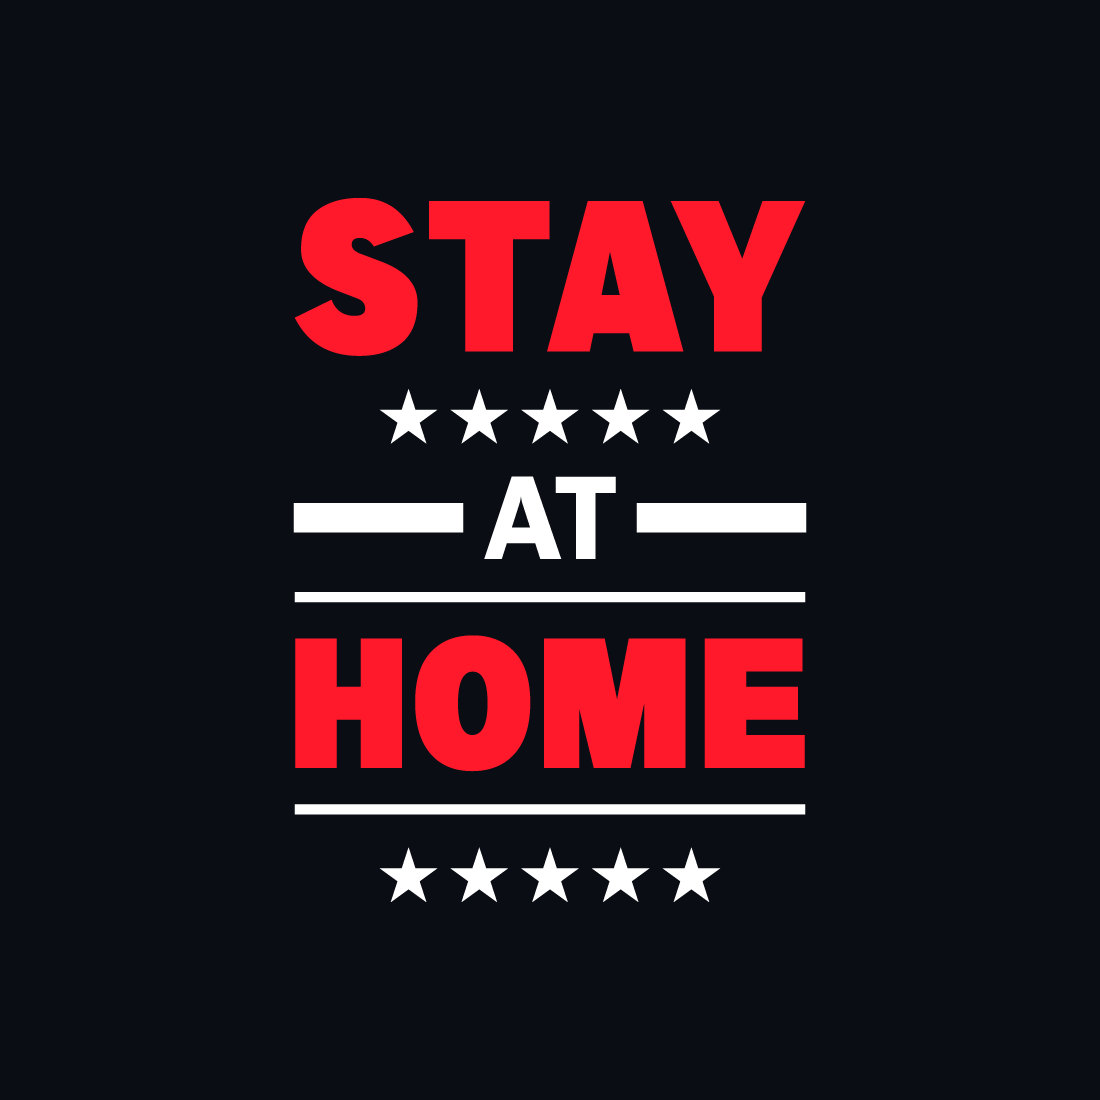 Stay at Home T-Shirt Design Illustration cover image.